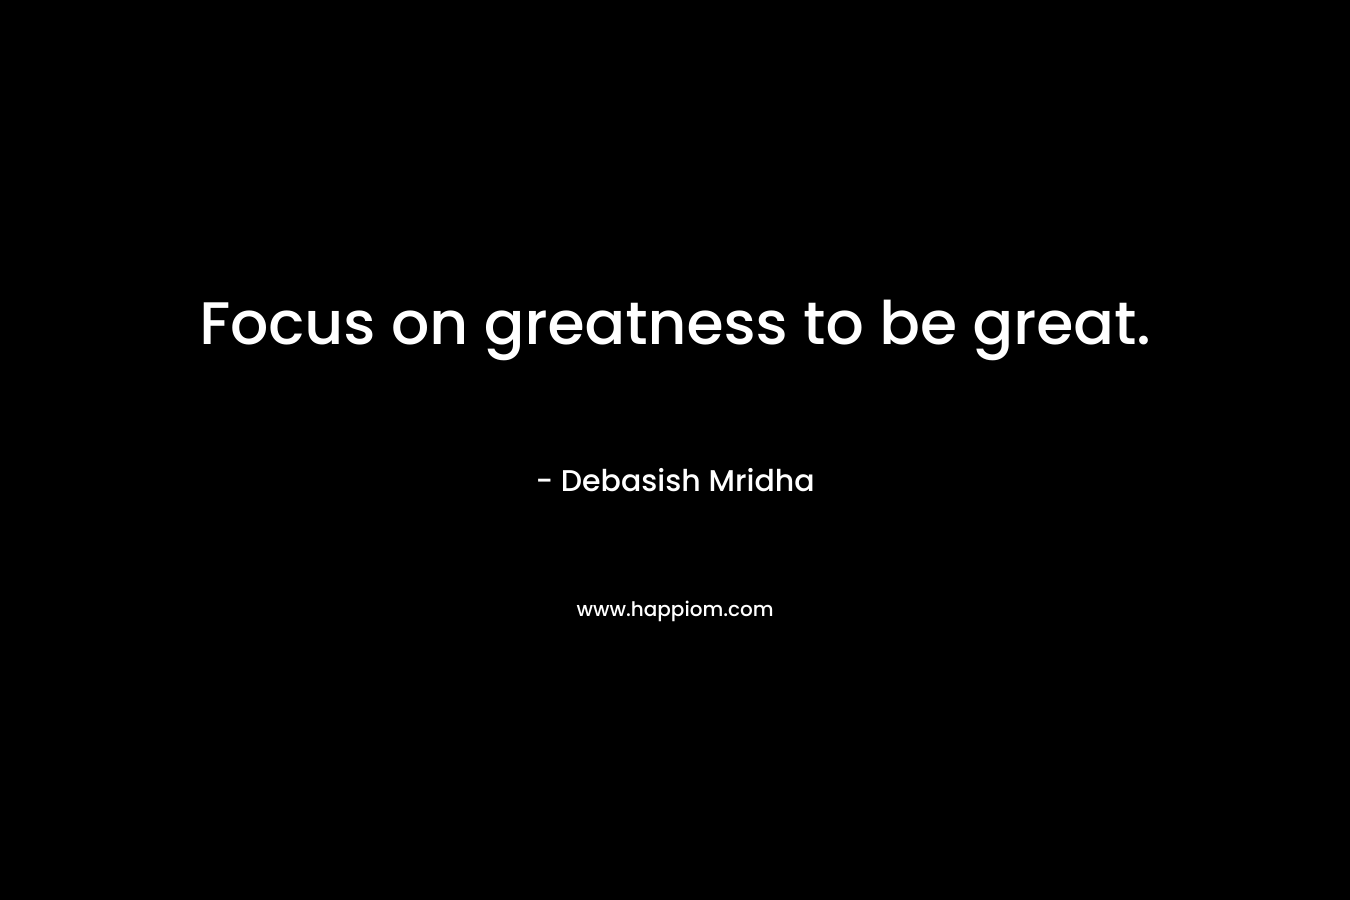 Focus on greatness to be great.